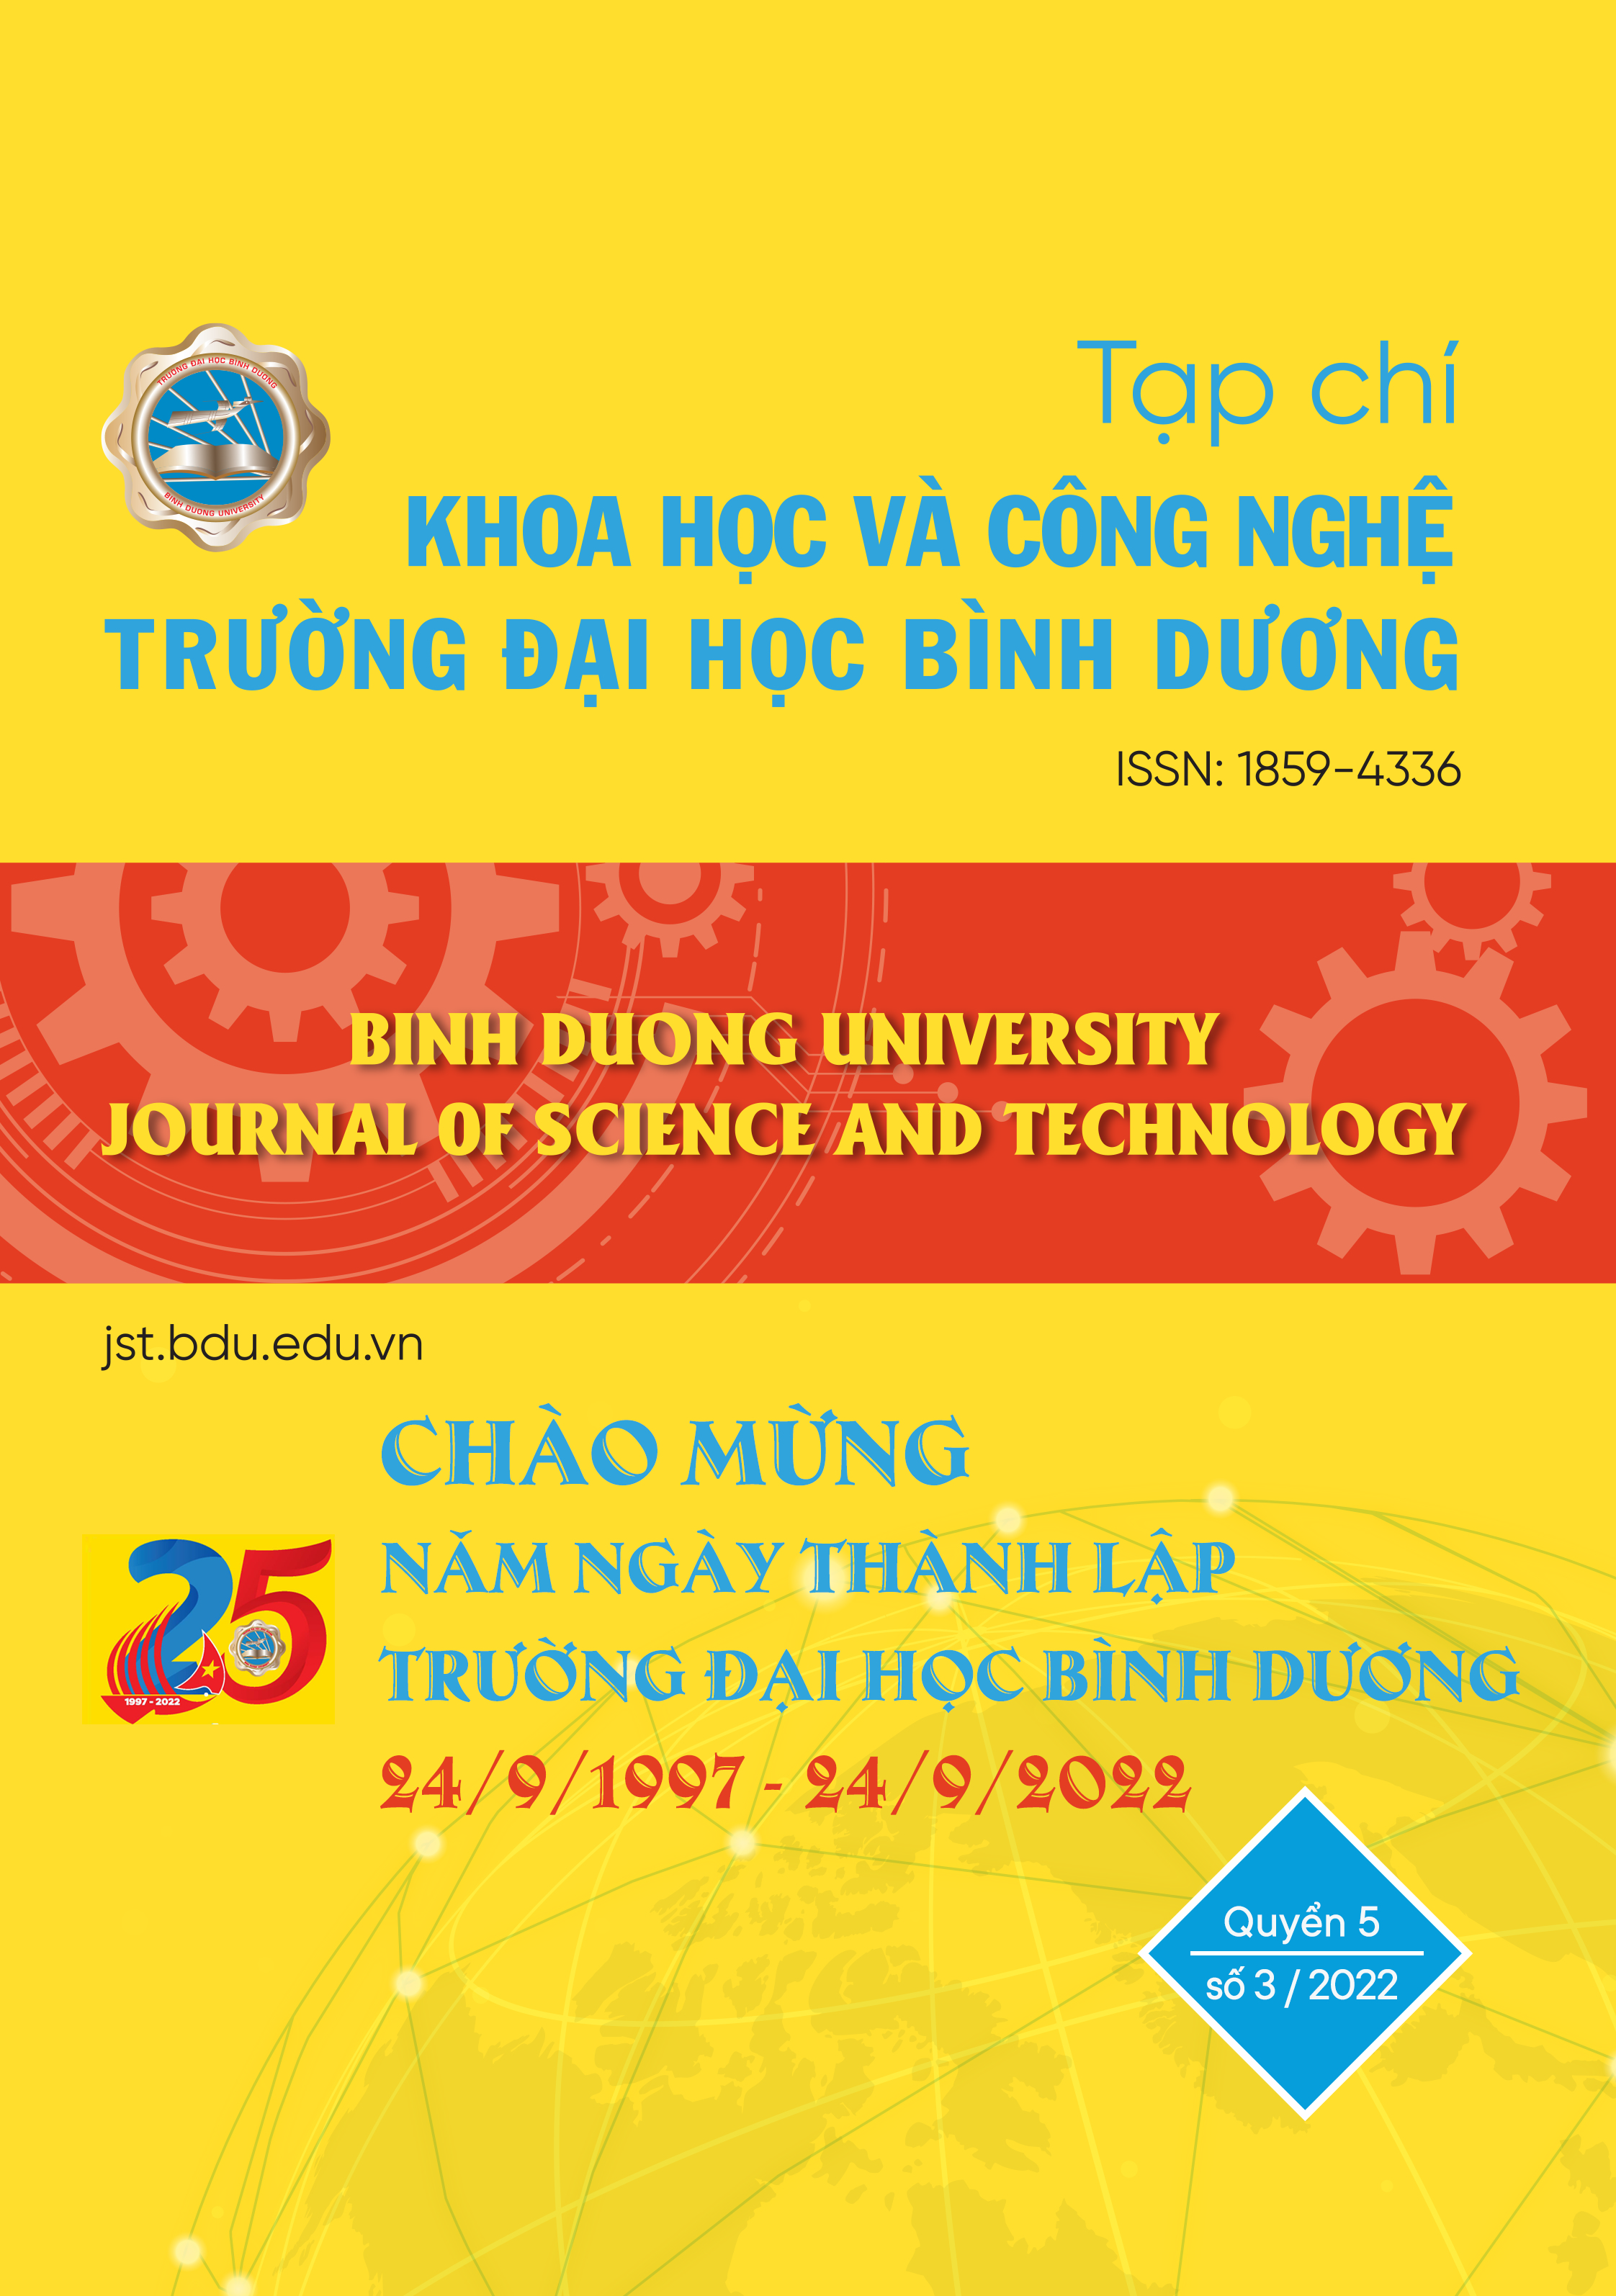 					View Vol. 5 No. 3 (2022): BINH DUONG UNIVERSITY JOURNAL OF SCIENCE AND TECHNOLOGY
				